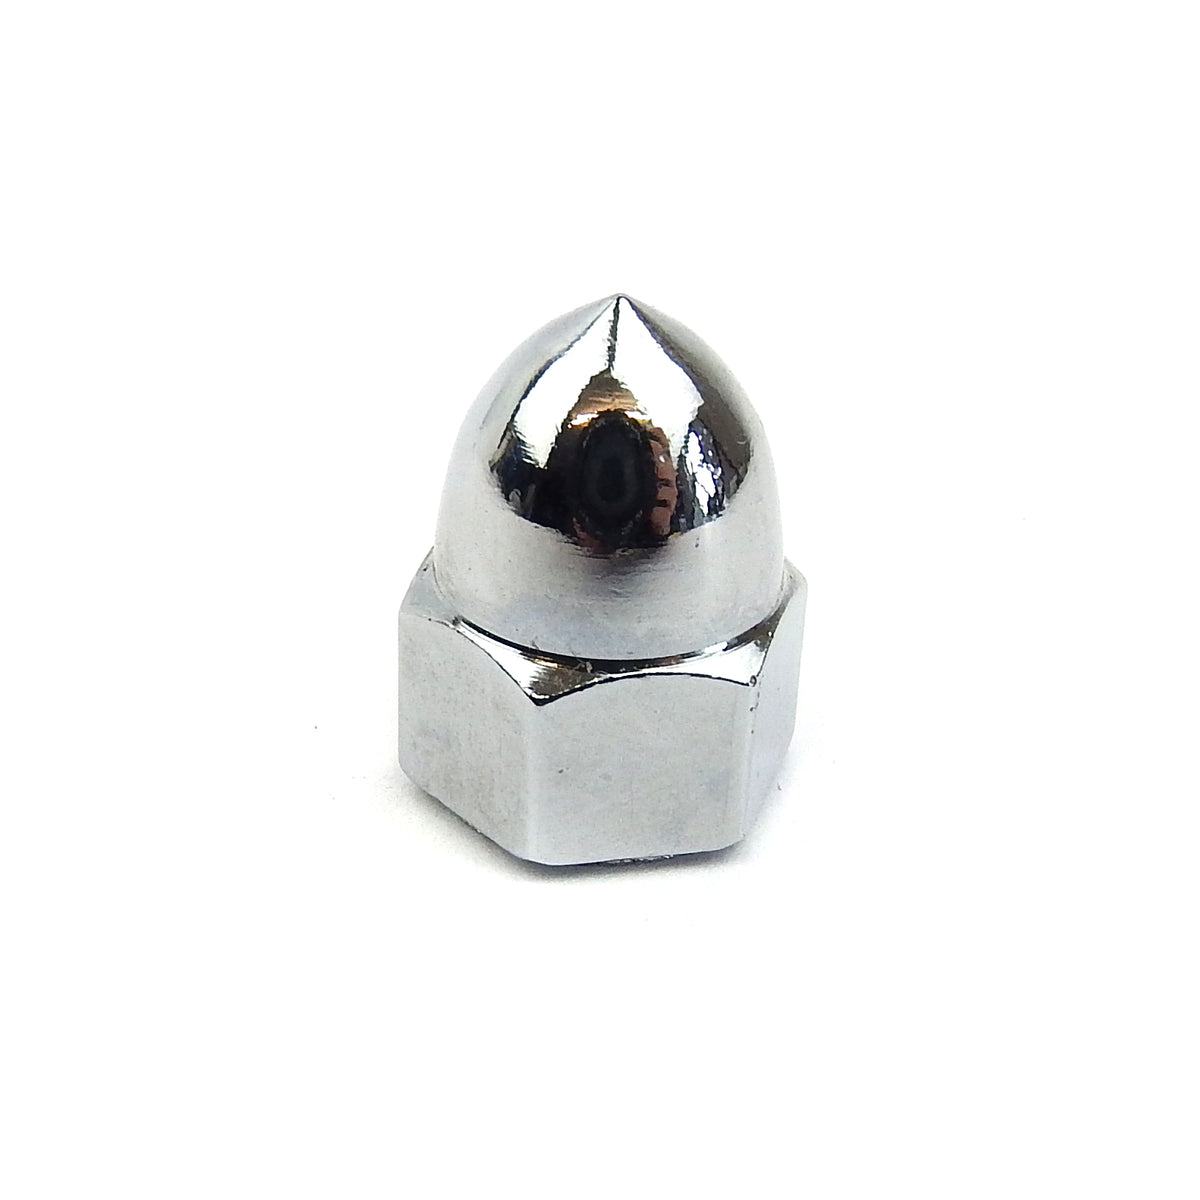 Chrome Acorn M6 Nut with 14mm Spanner Fitment